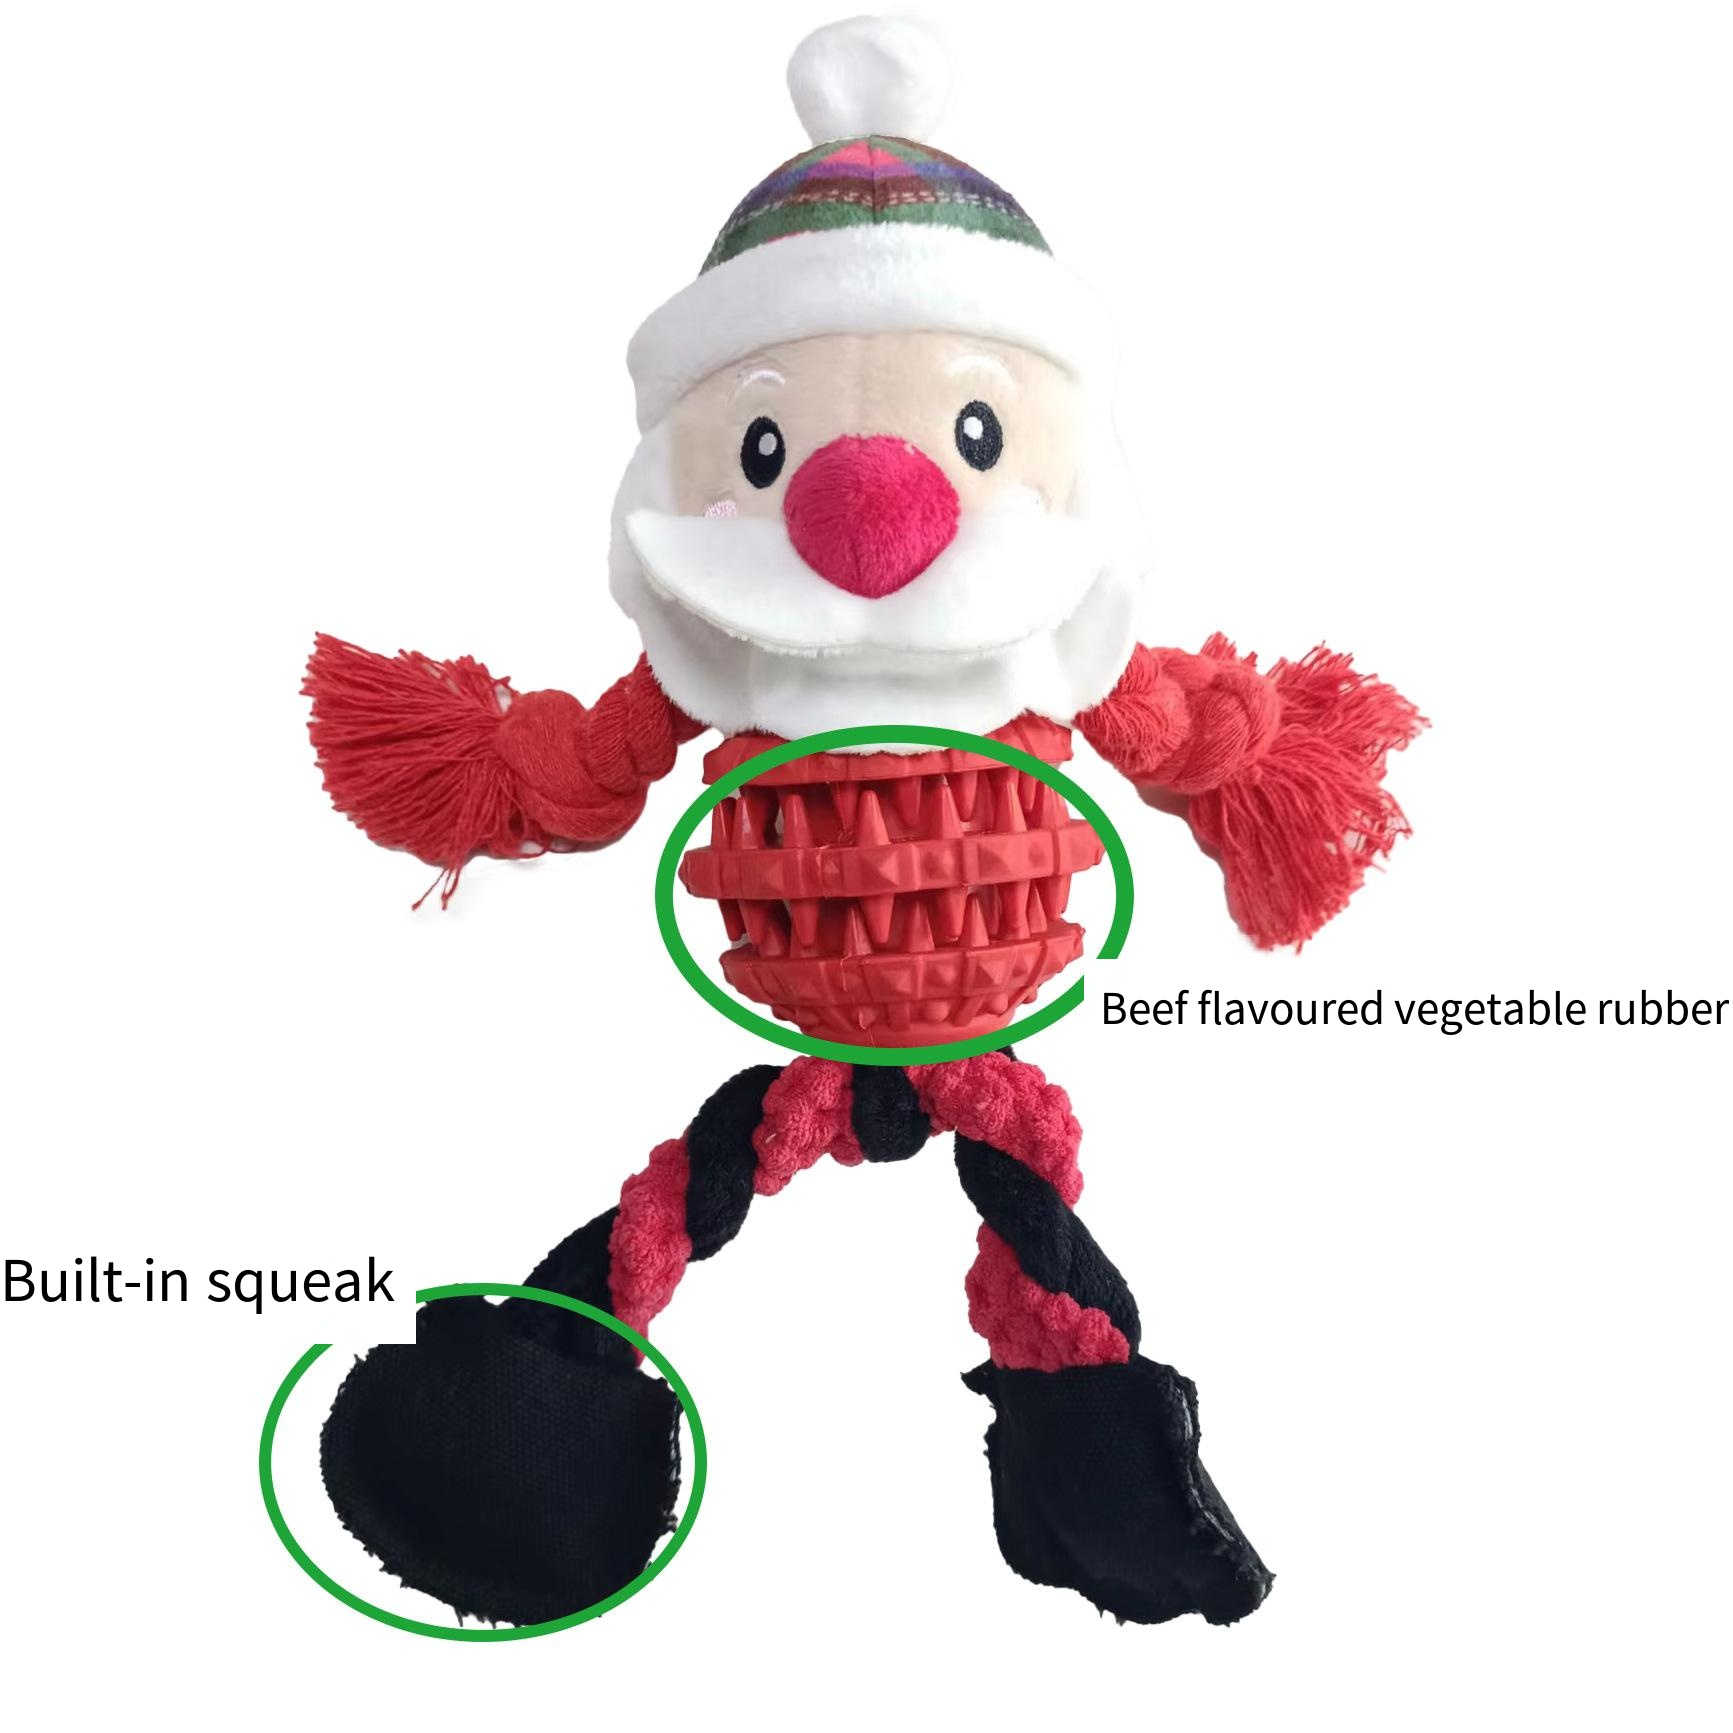 Christmas style rubber tooth cleaner dog toy